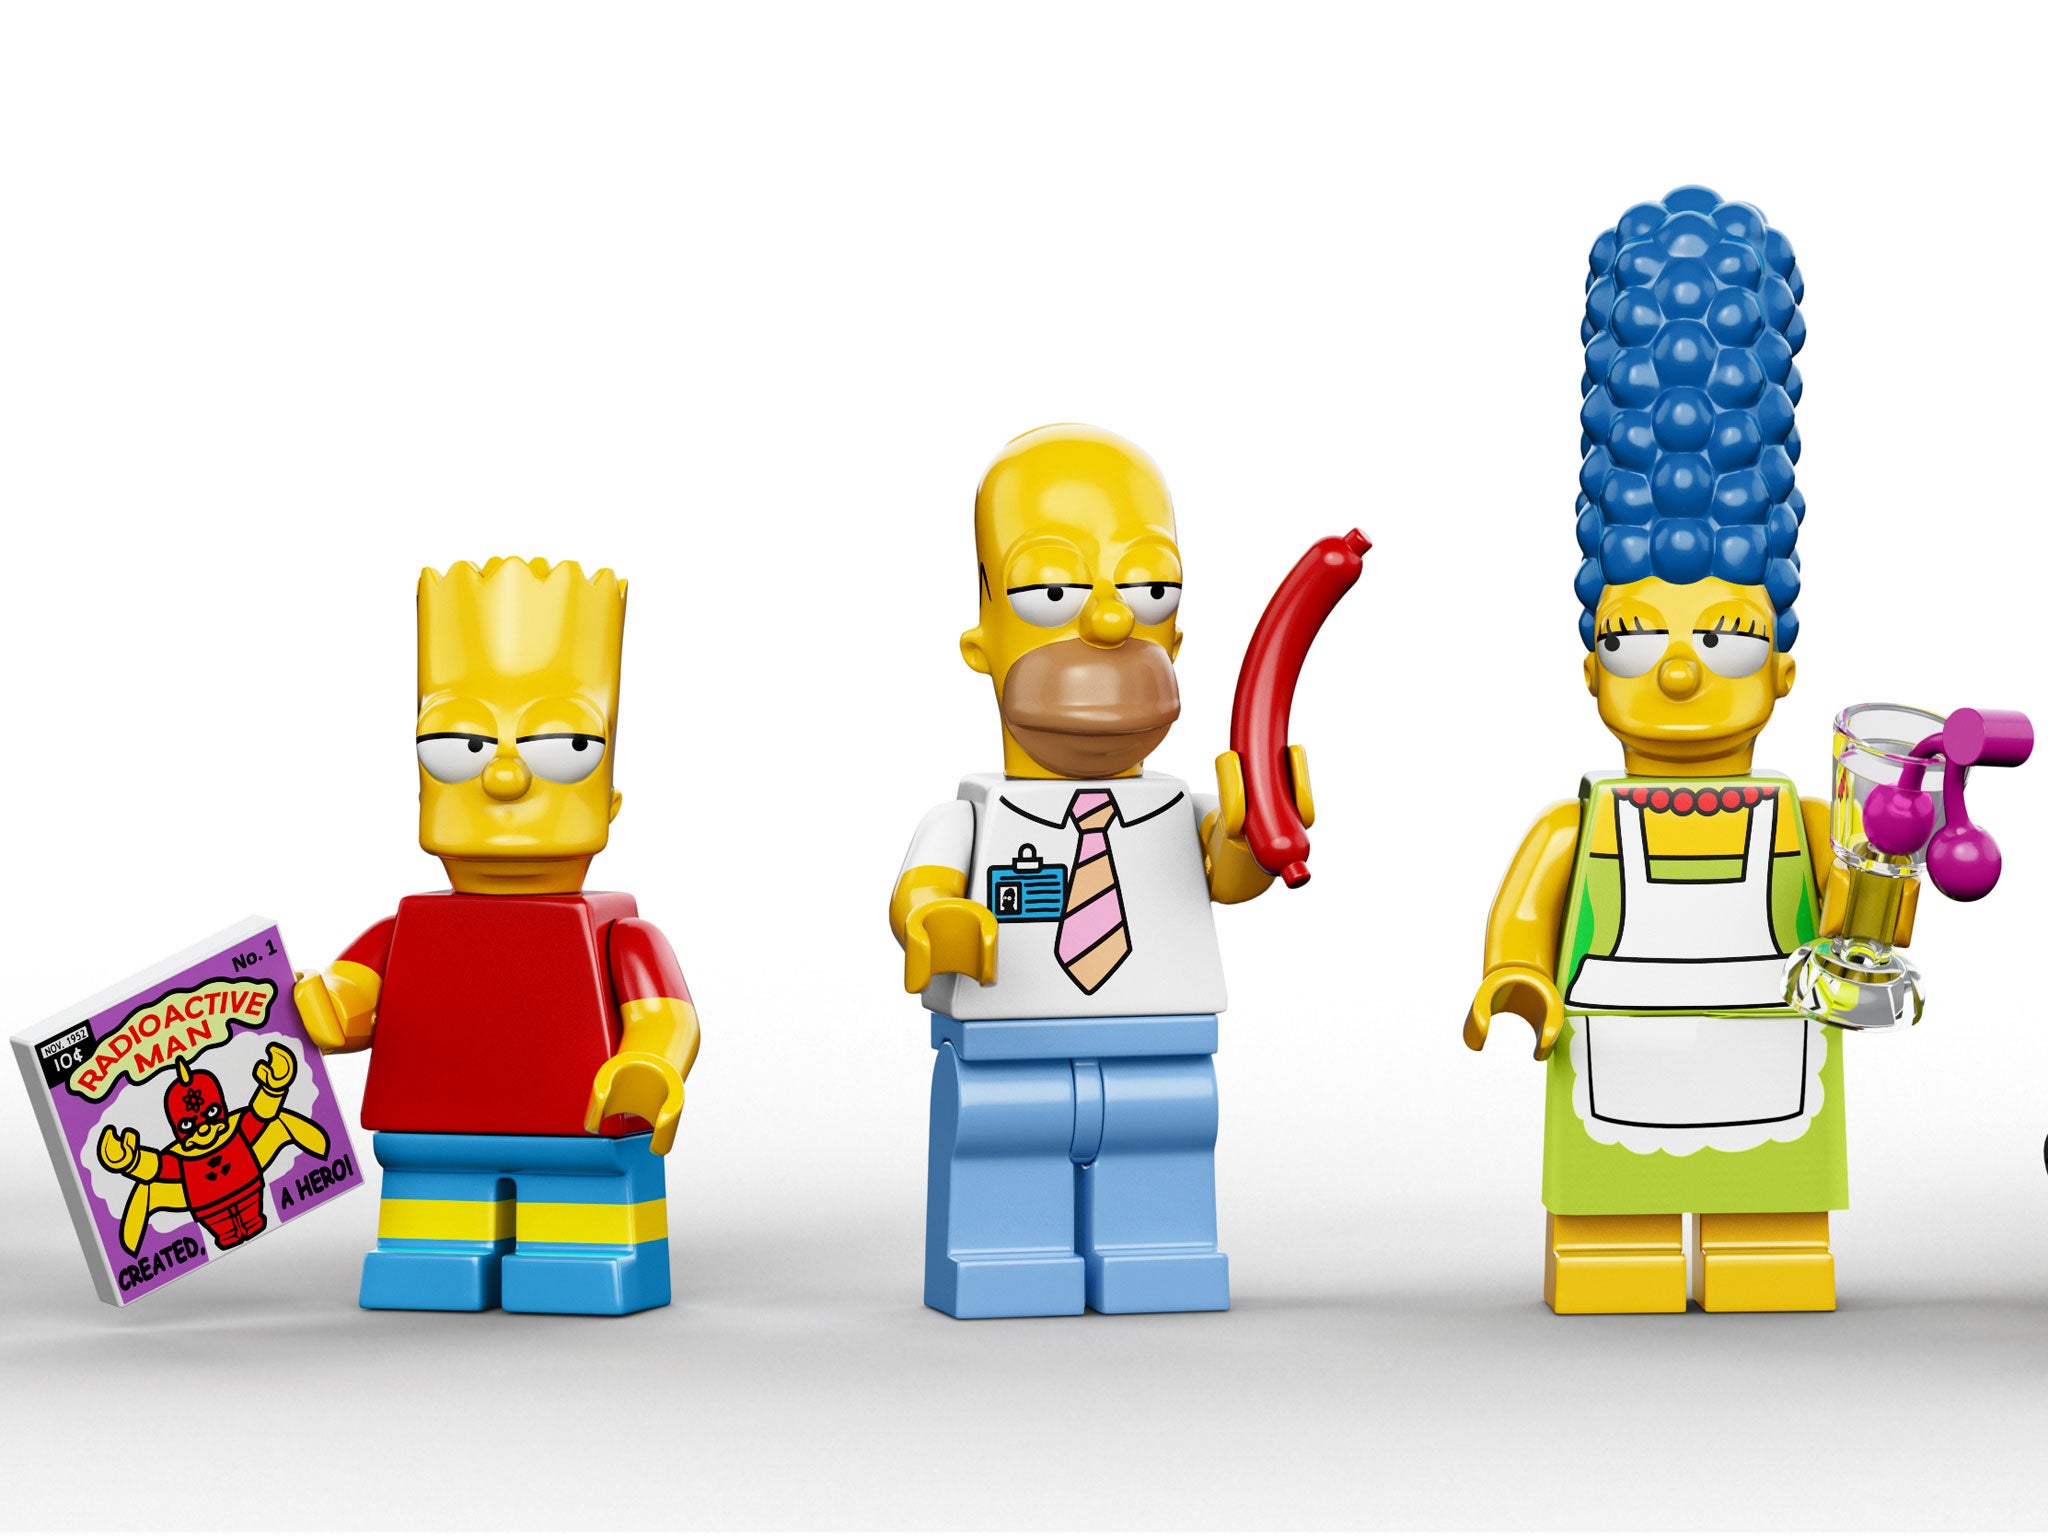 Bart, Homer and Marge Simpson as Lego characters - the family will star in an all-Lego episode of The Simpsons due to air on 4 May 2014